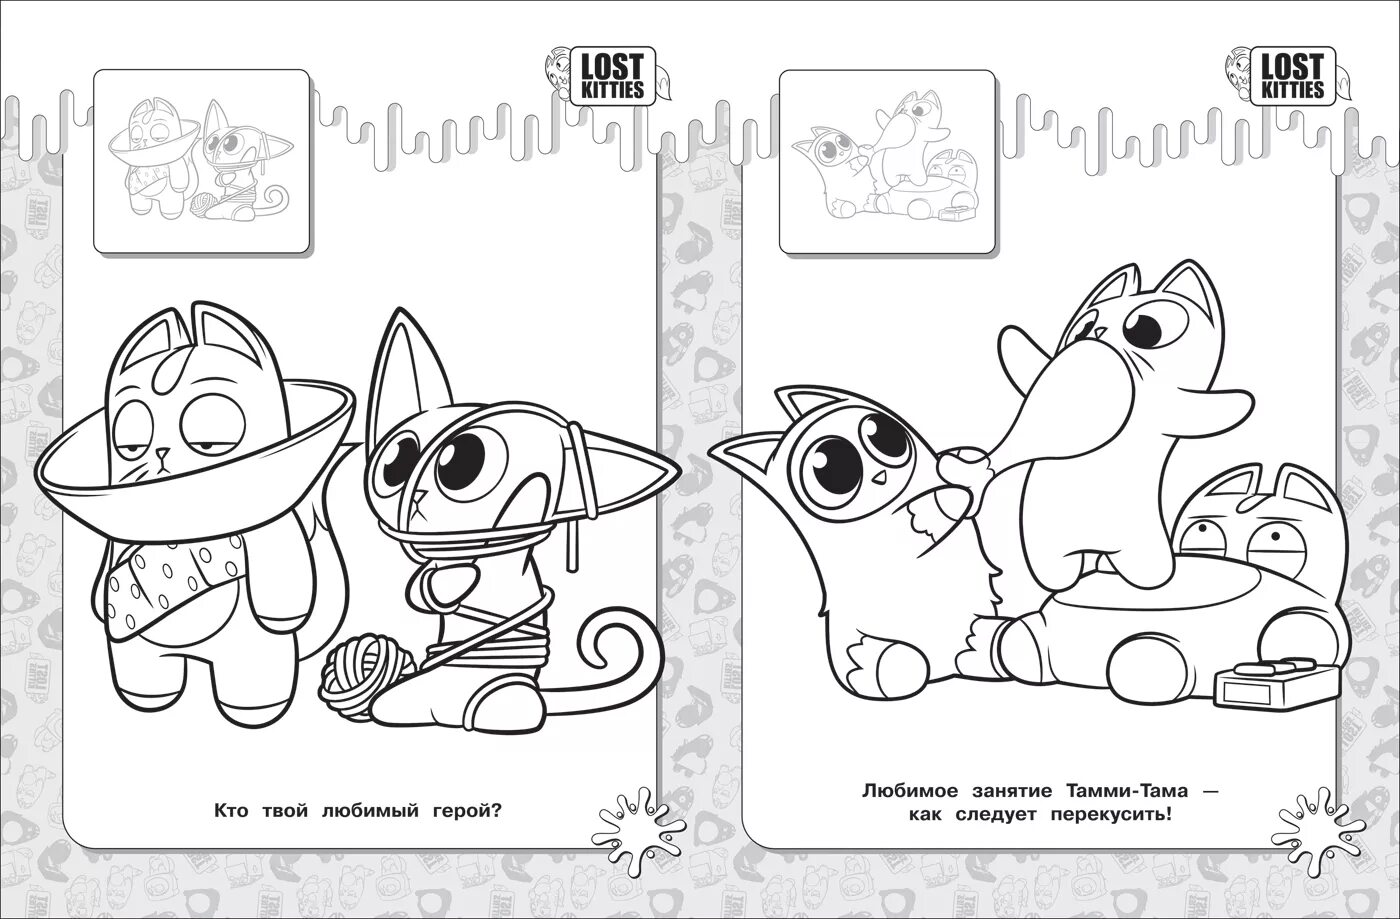 Coloring page witty lost kittens